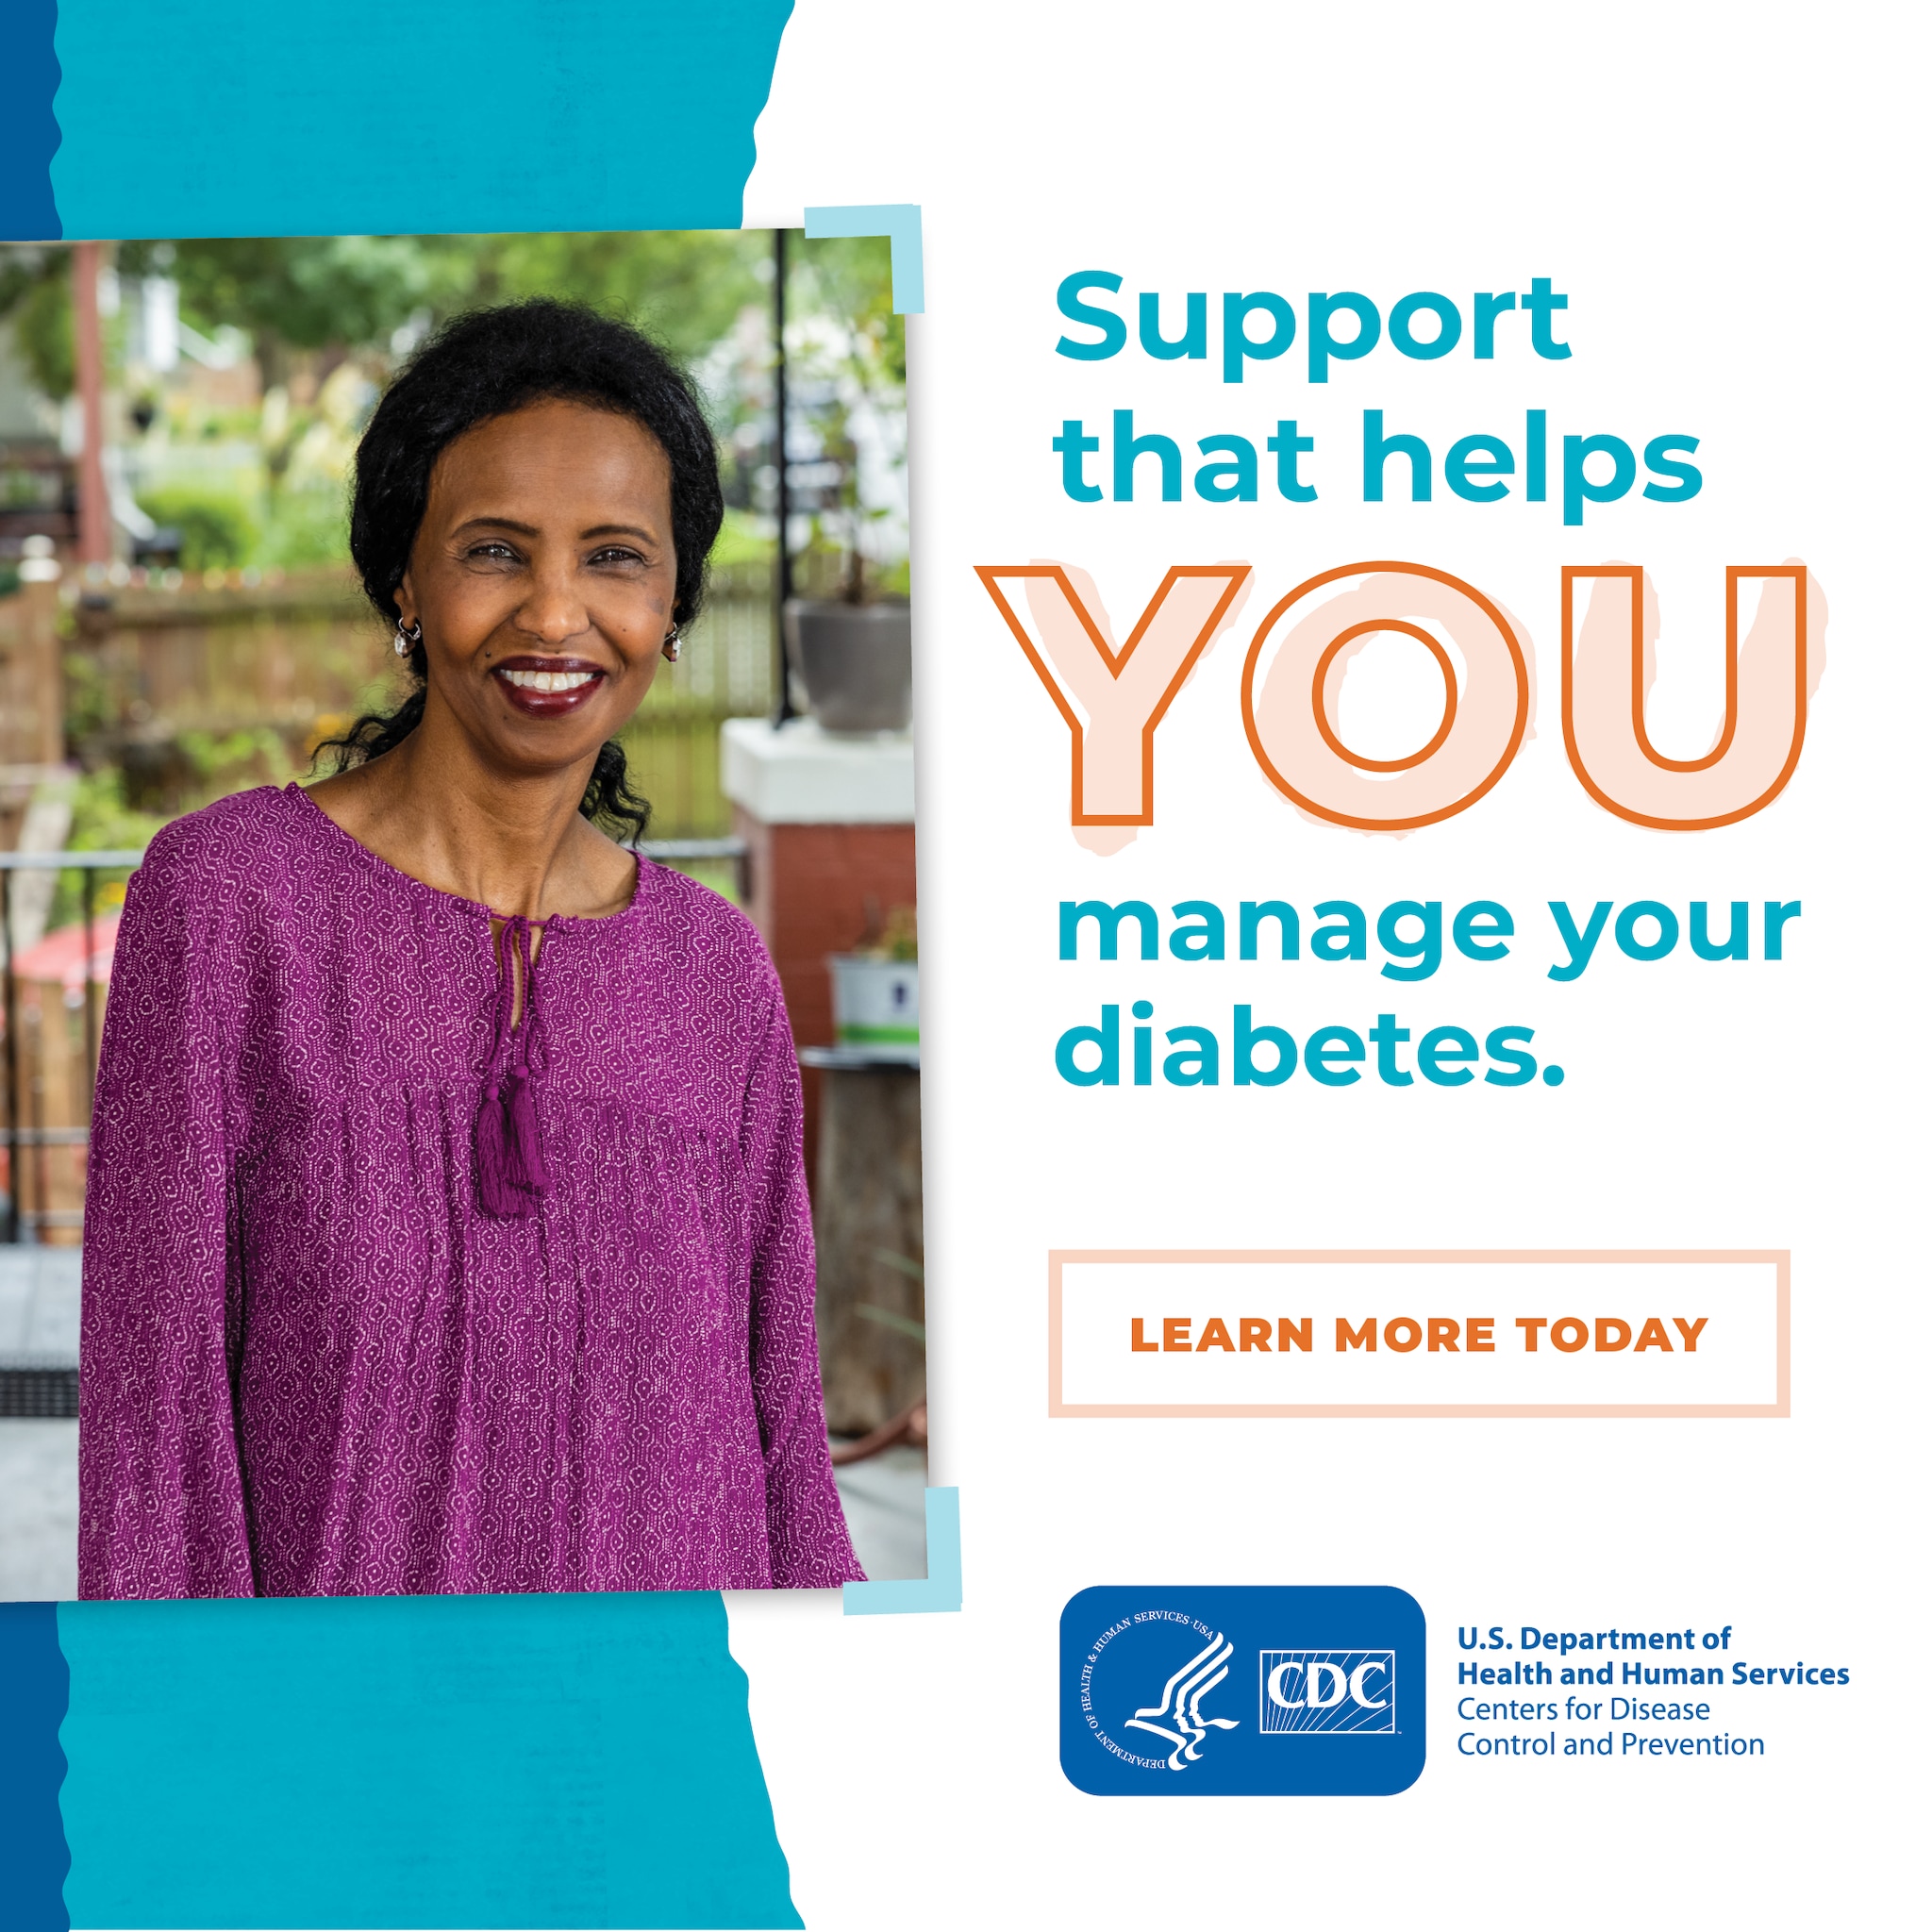 Support that helps you manage your diabetes. Learn more today. CDC logo.